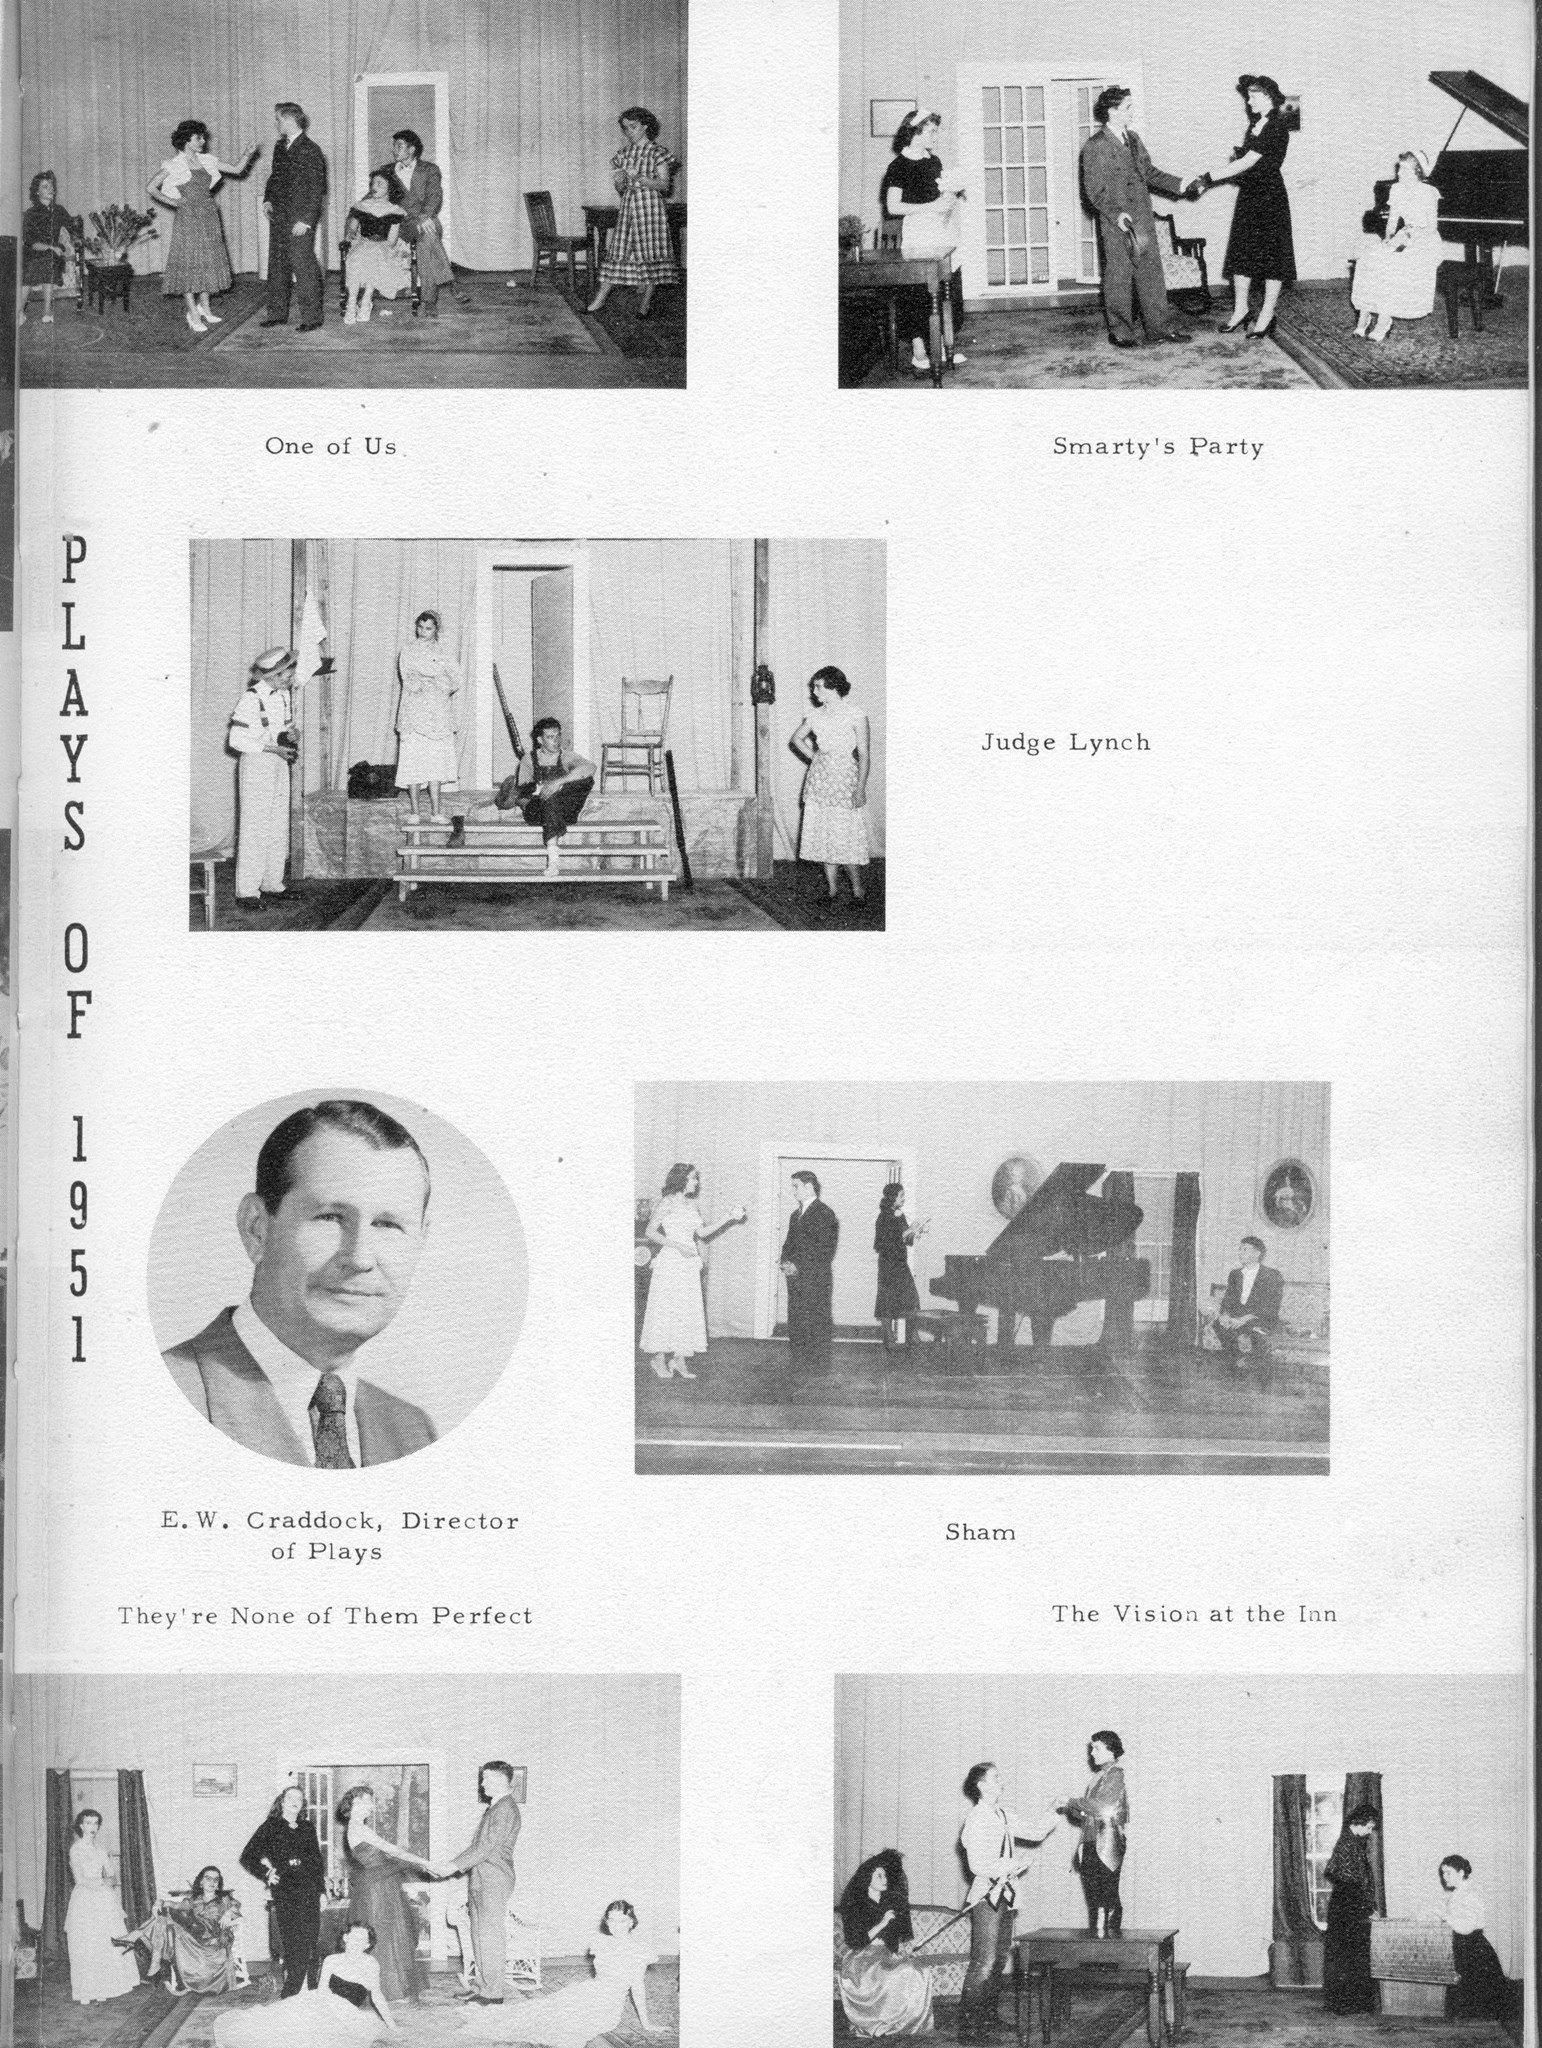 ../../../Images/Large/1952/Arclight-1952-pg0081.jpg